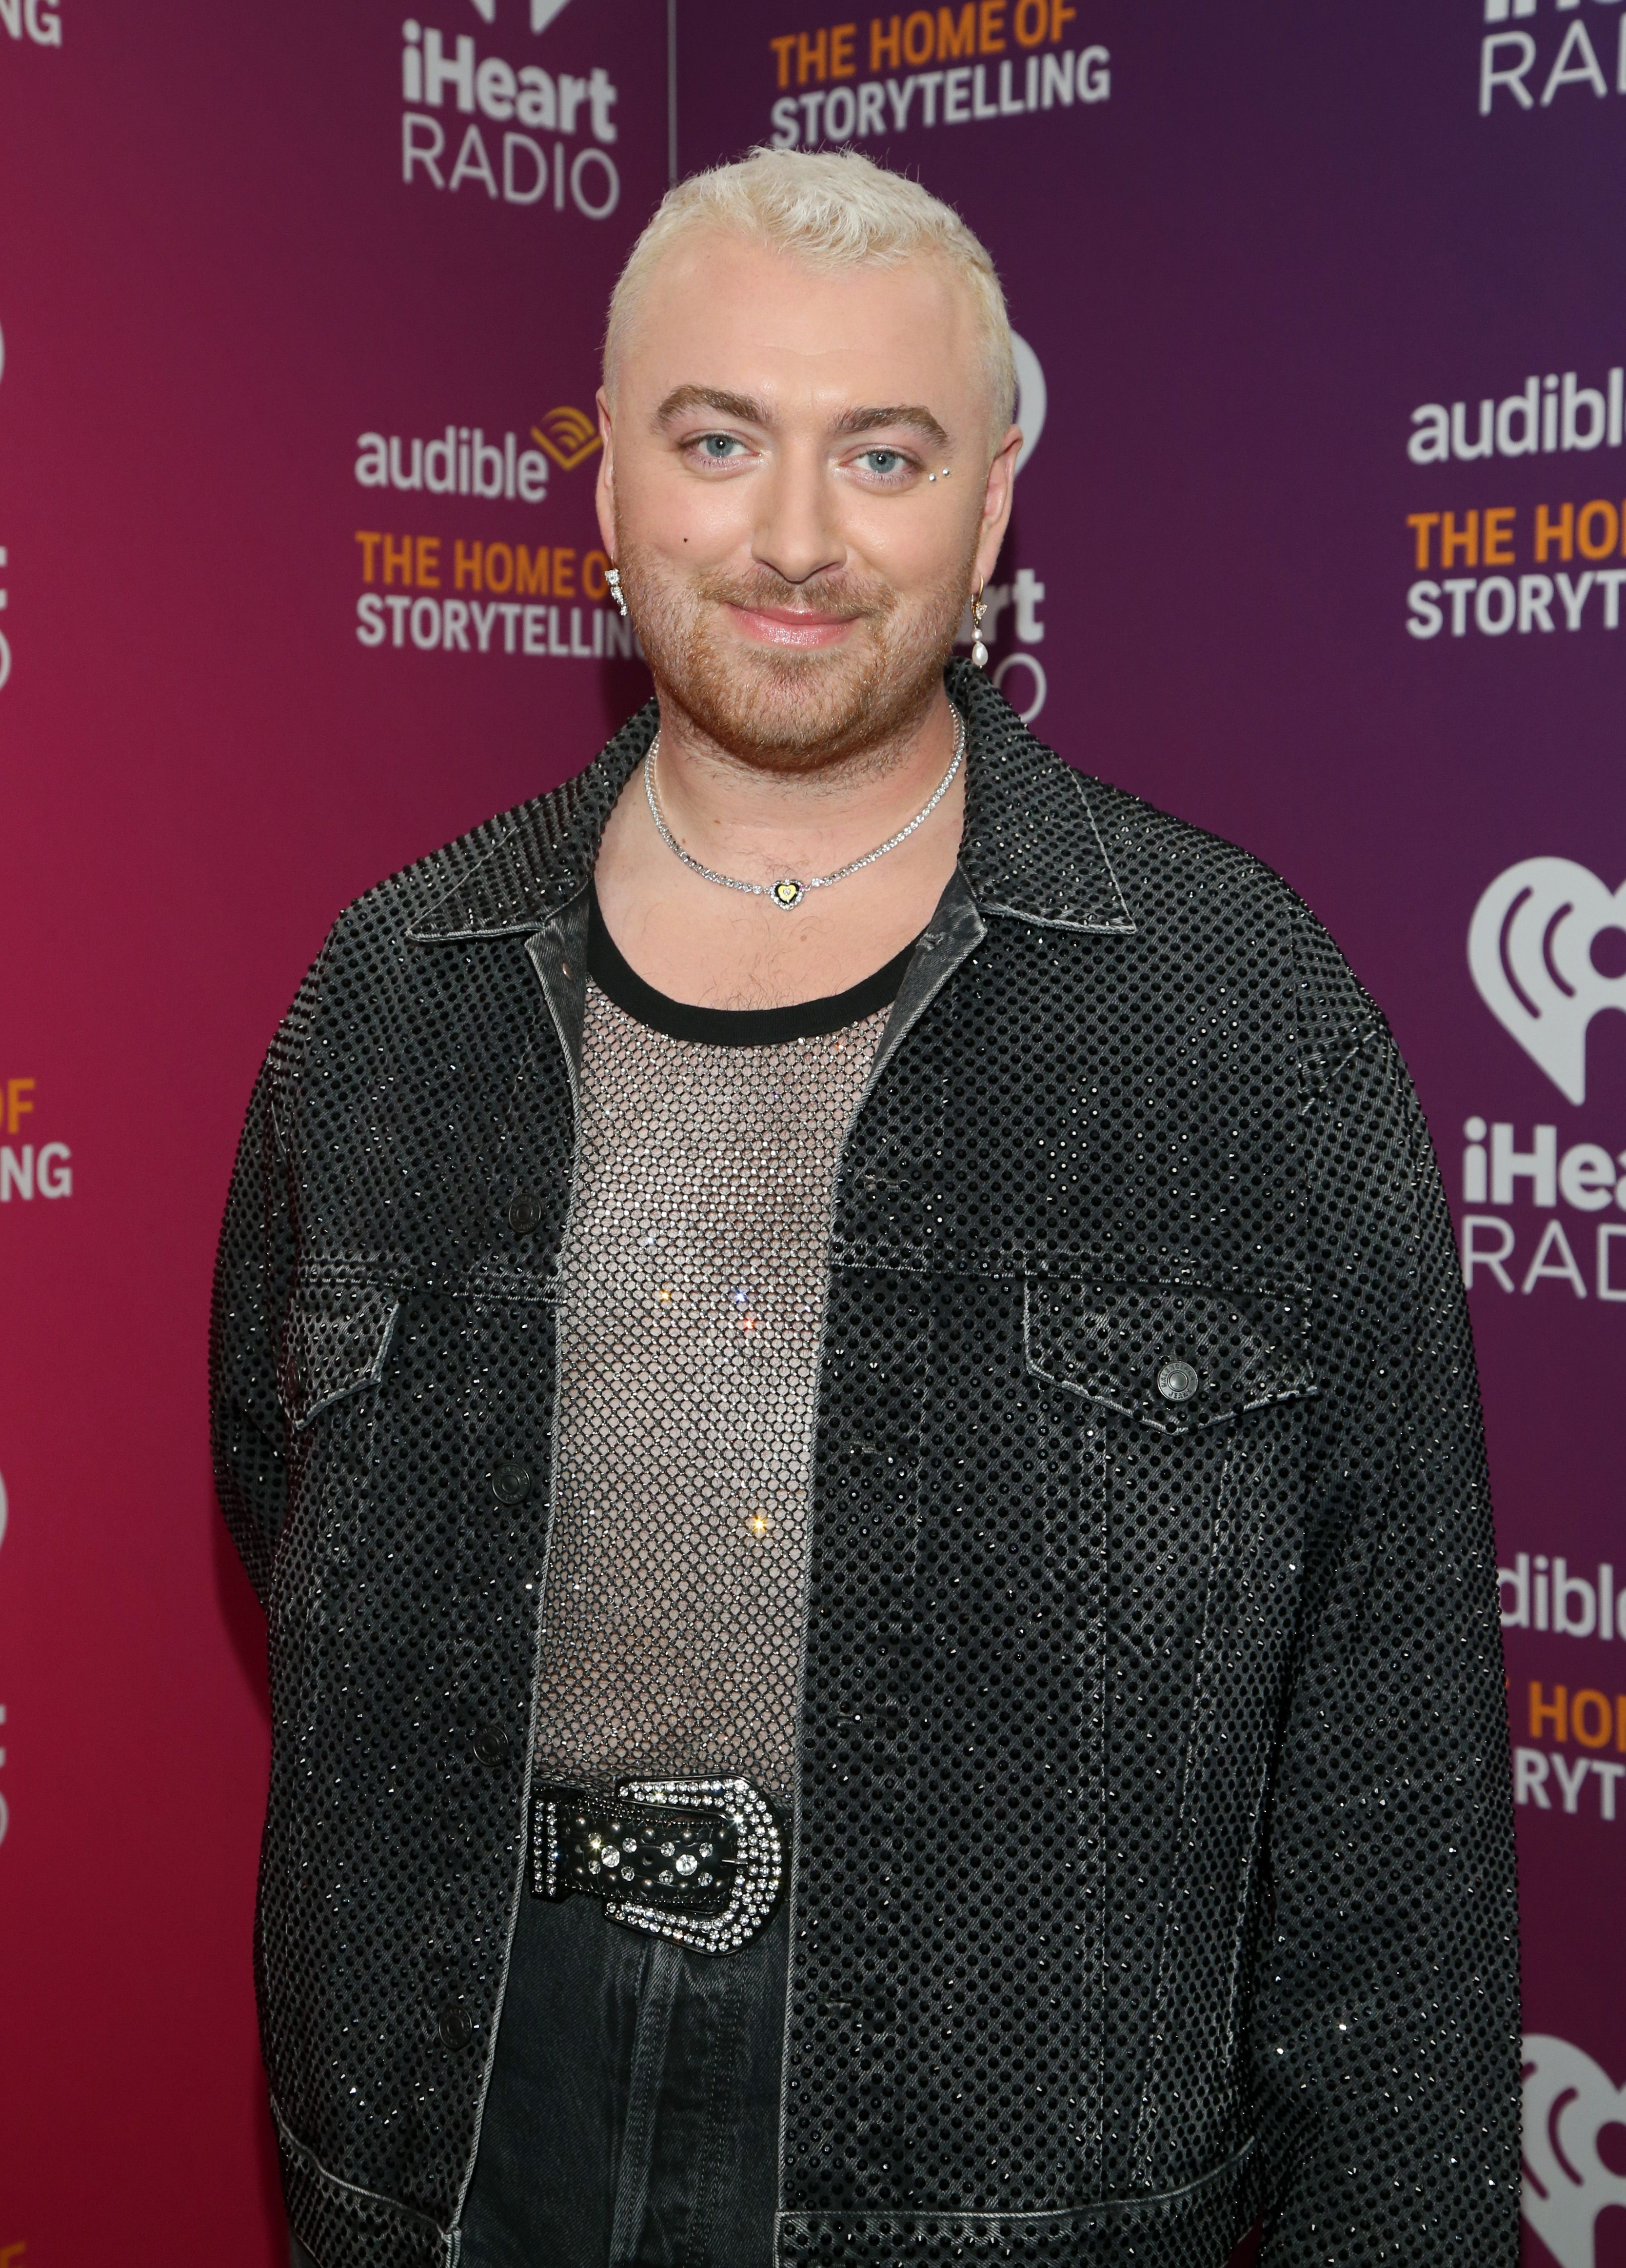 Sam Smith reveals bizarre penis gift they received from celeb friend